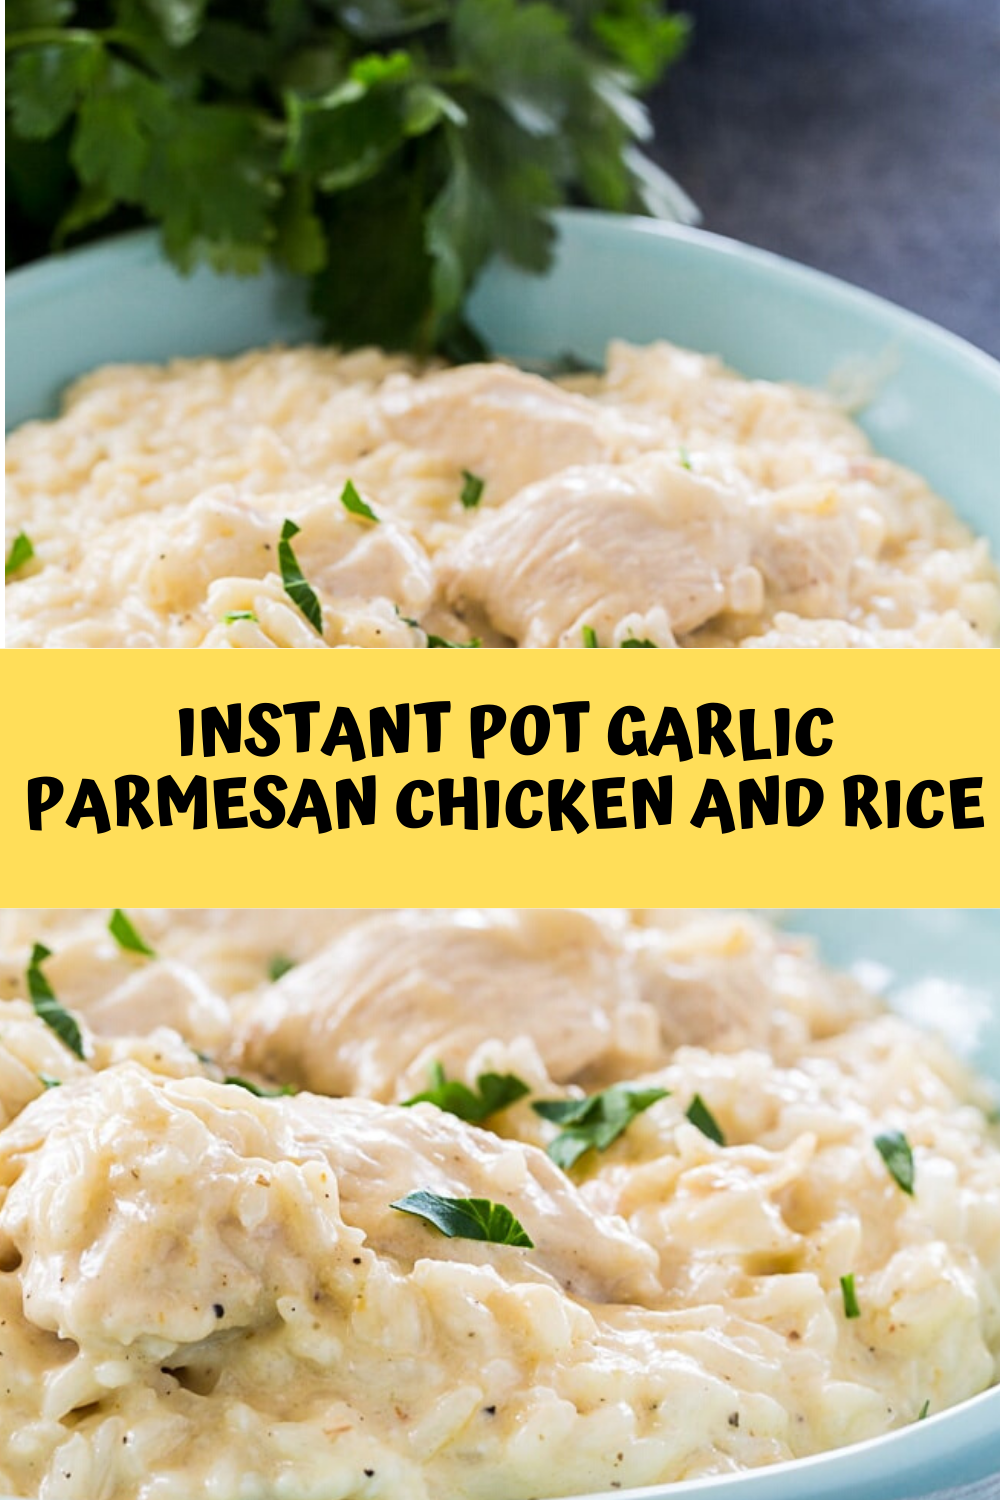 Instant Pot Garlic Parmesan Chicken and Rice